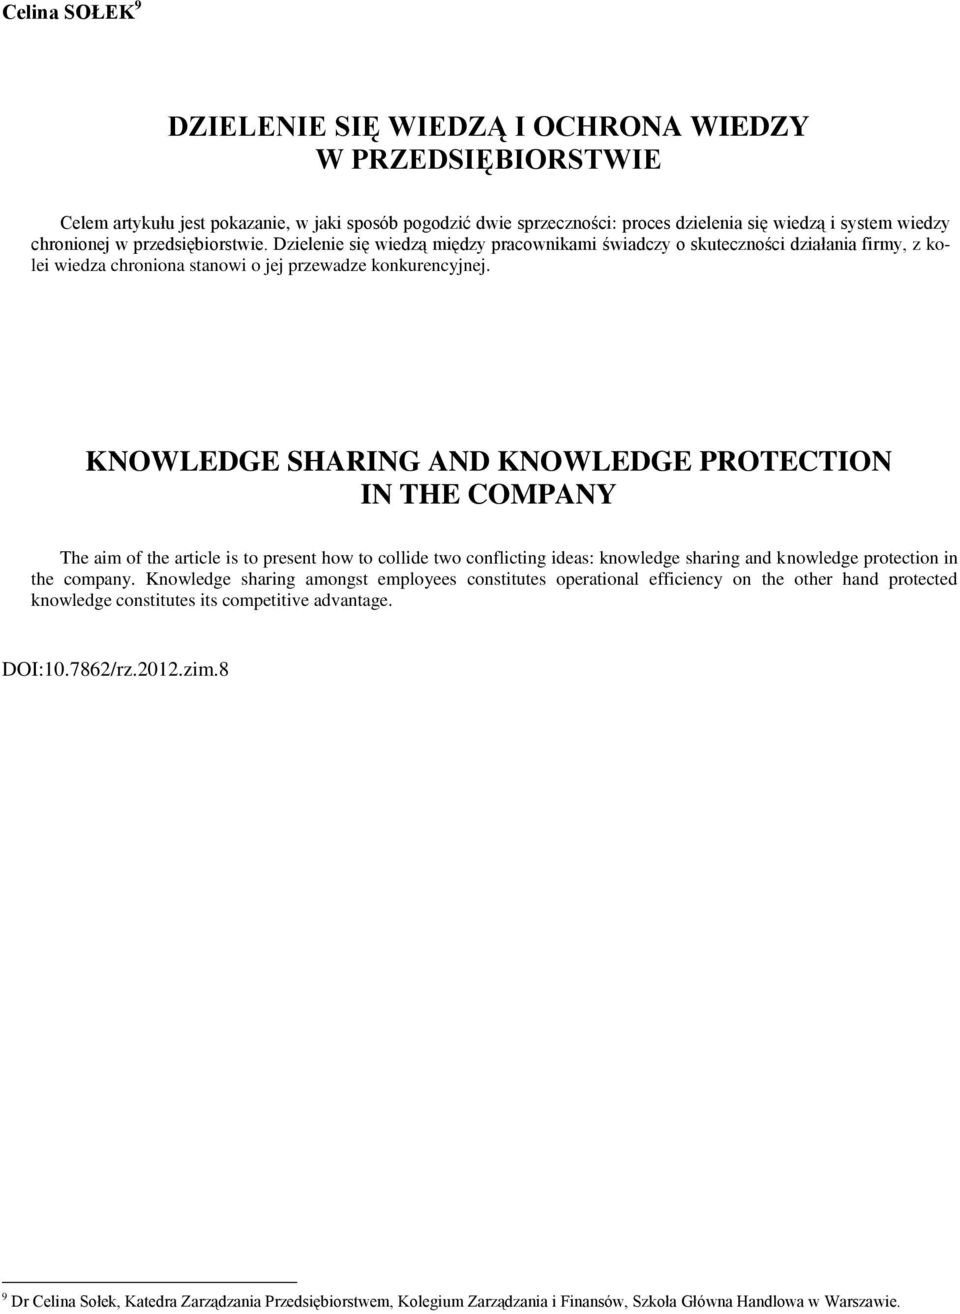 KNOWLEDGE SHARING AND KNOWLEDGE PROTECTION IN THE COMPANY The aim of the article is to present how to collide two conflicting ideas: knowledge sharing and knowledge protection in the company.